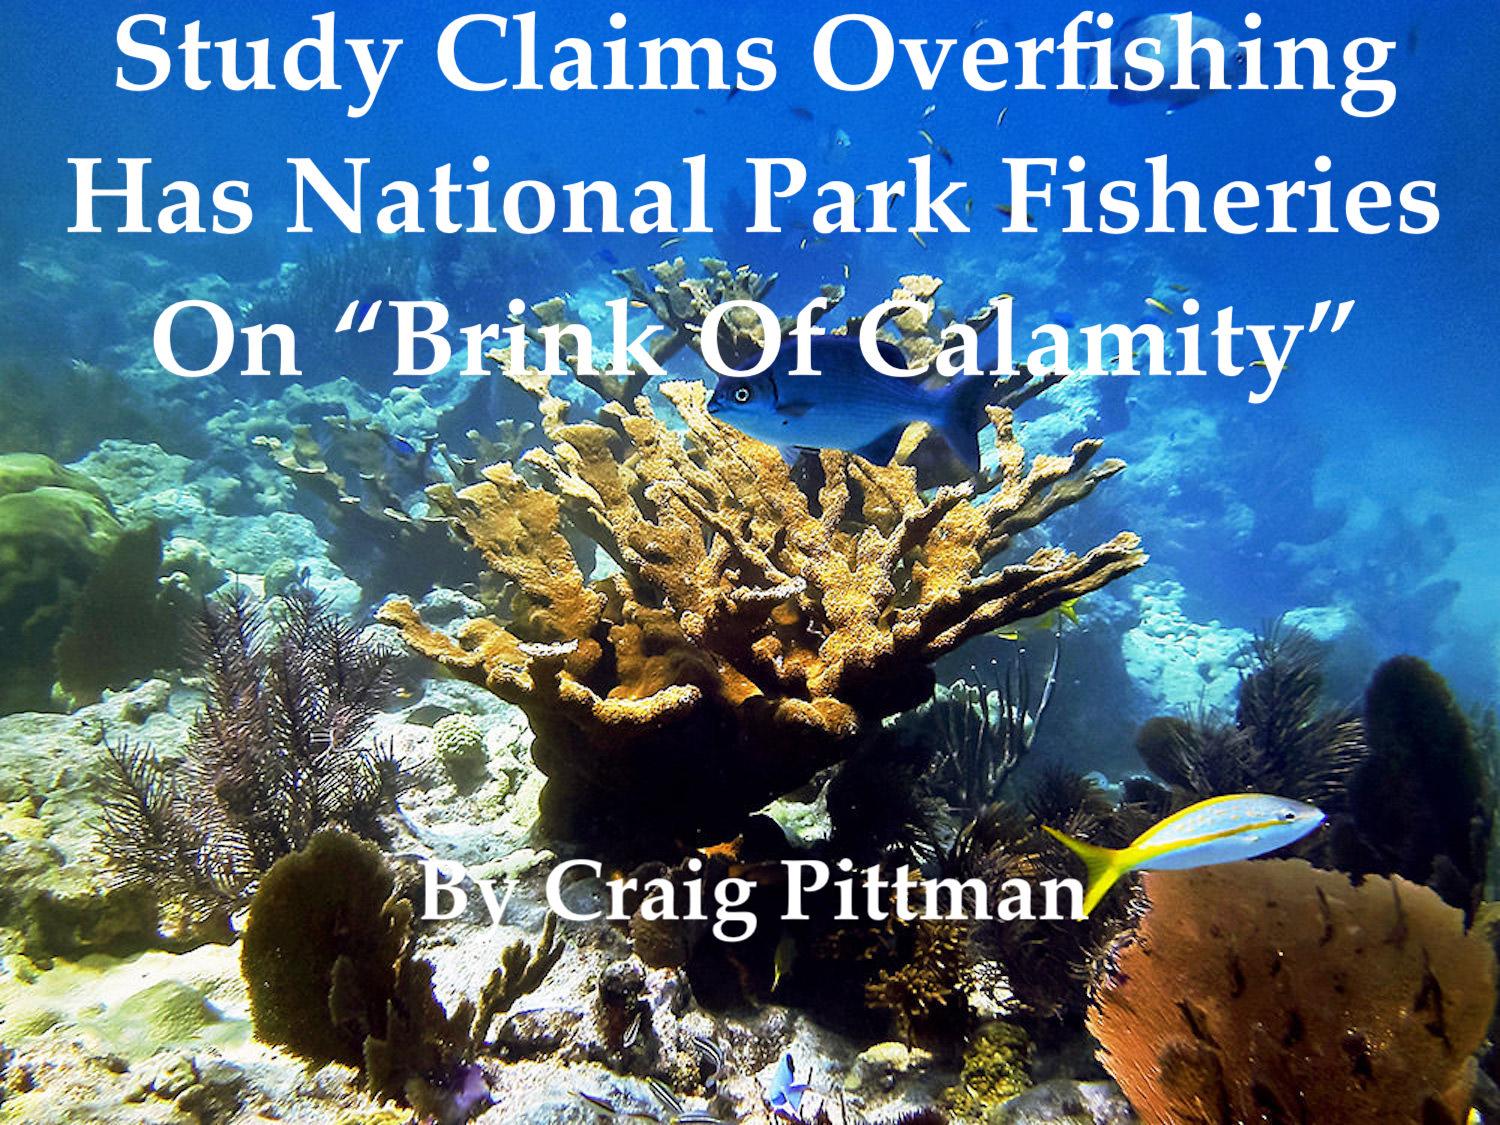 Overfishing has national park fisheries in Florida on &quot;brink of calamity, according to a new study/NOAA